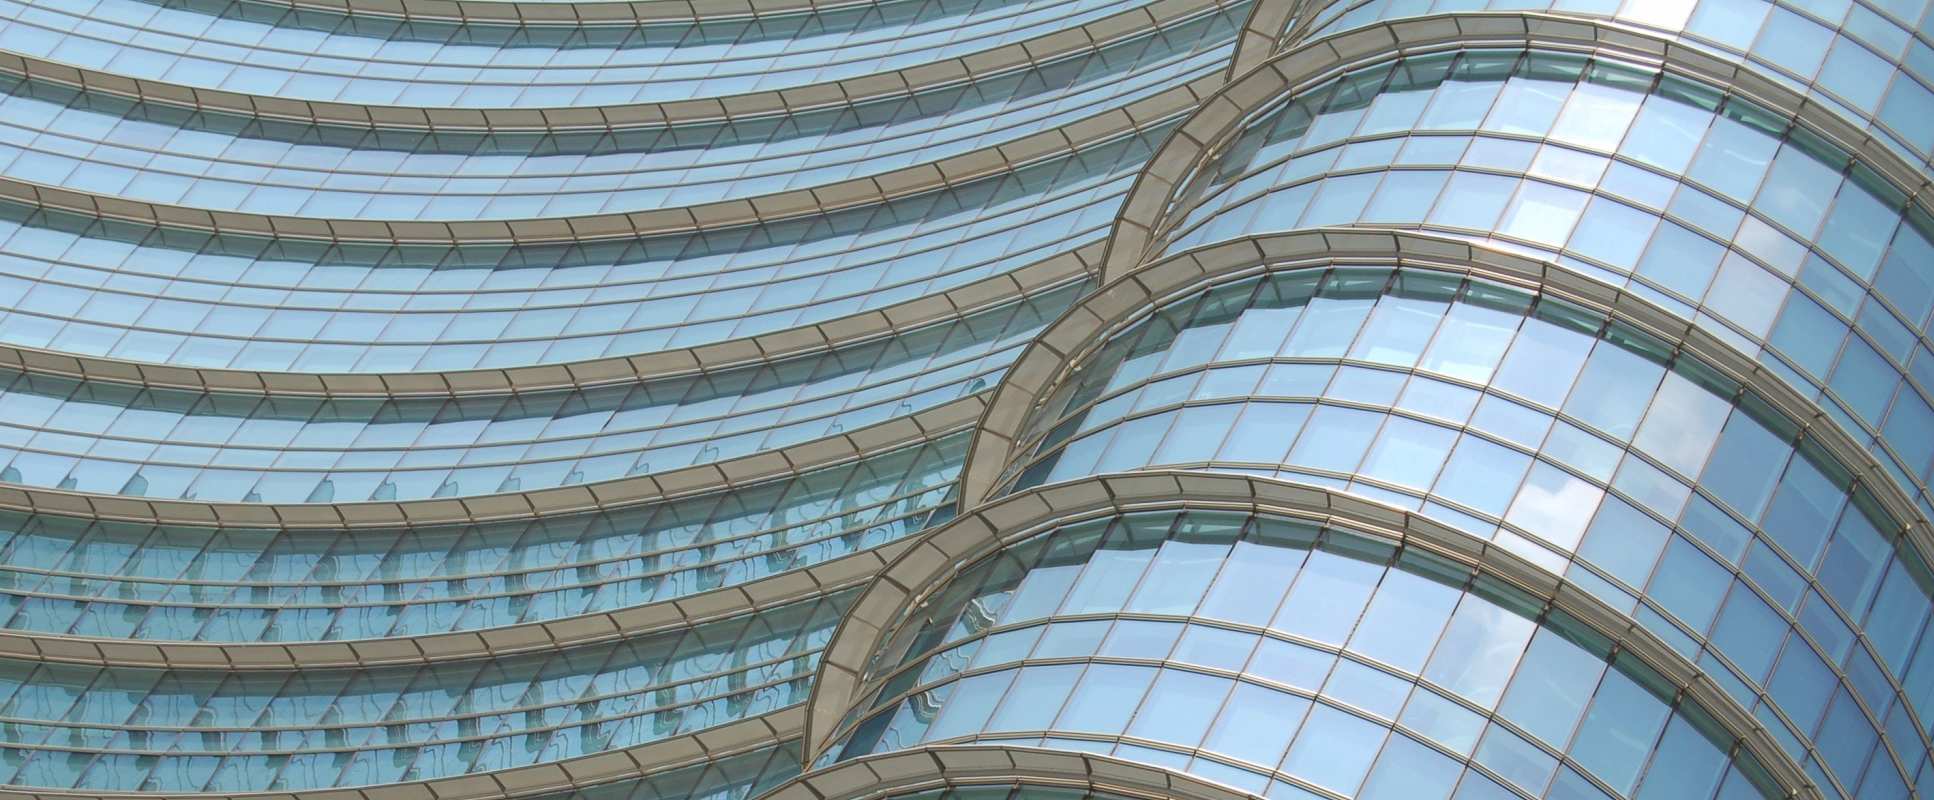 Curved building in milan